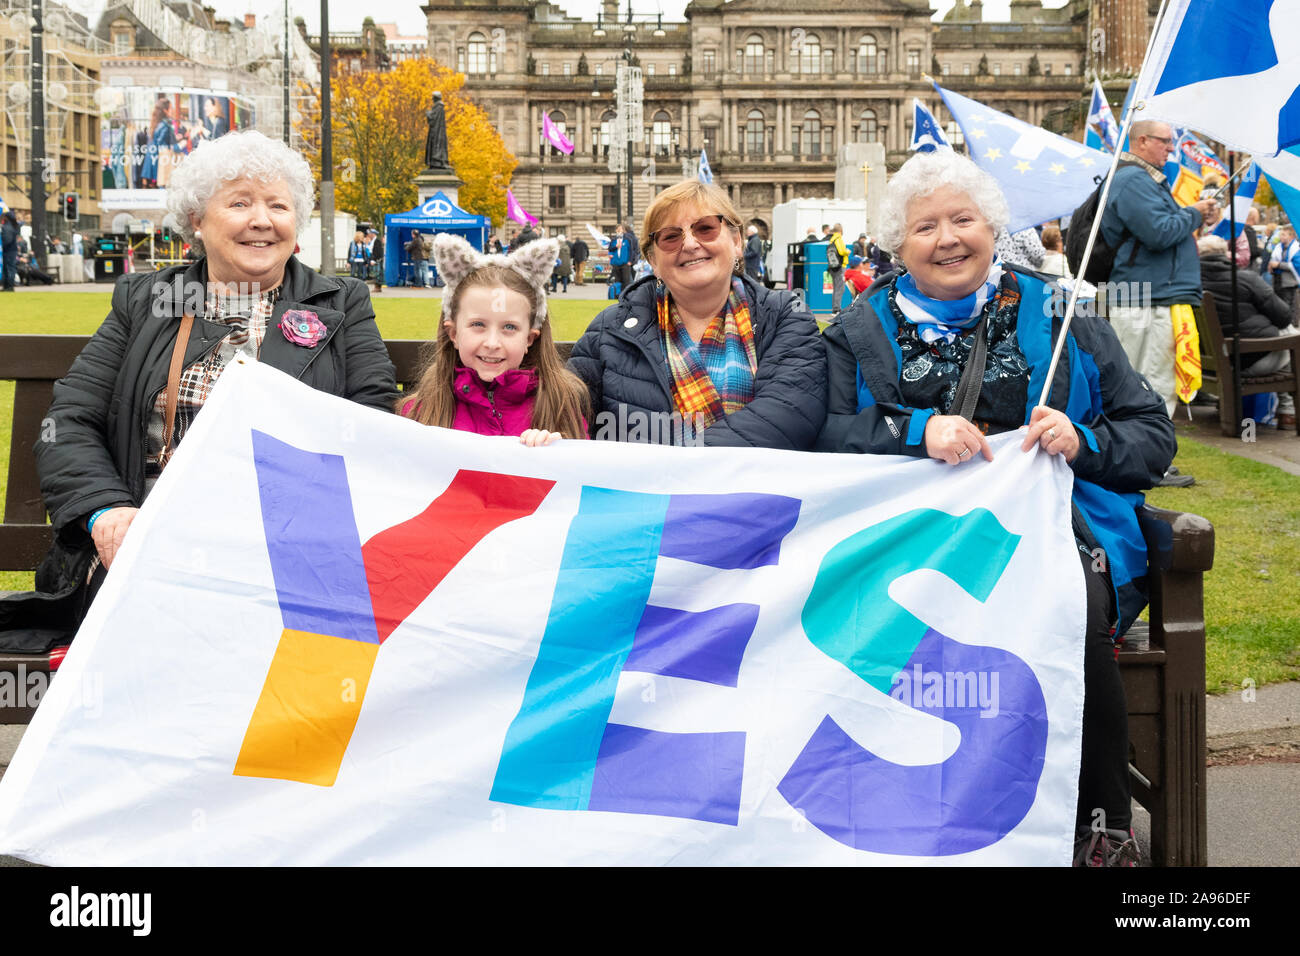 Scottish Independence supporters holding a large YES banner at an Independence Rally indyref 2020 in George Square, Glasgow, Scotland, UK Stock Photo